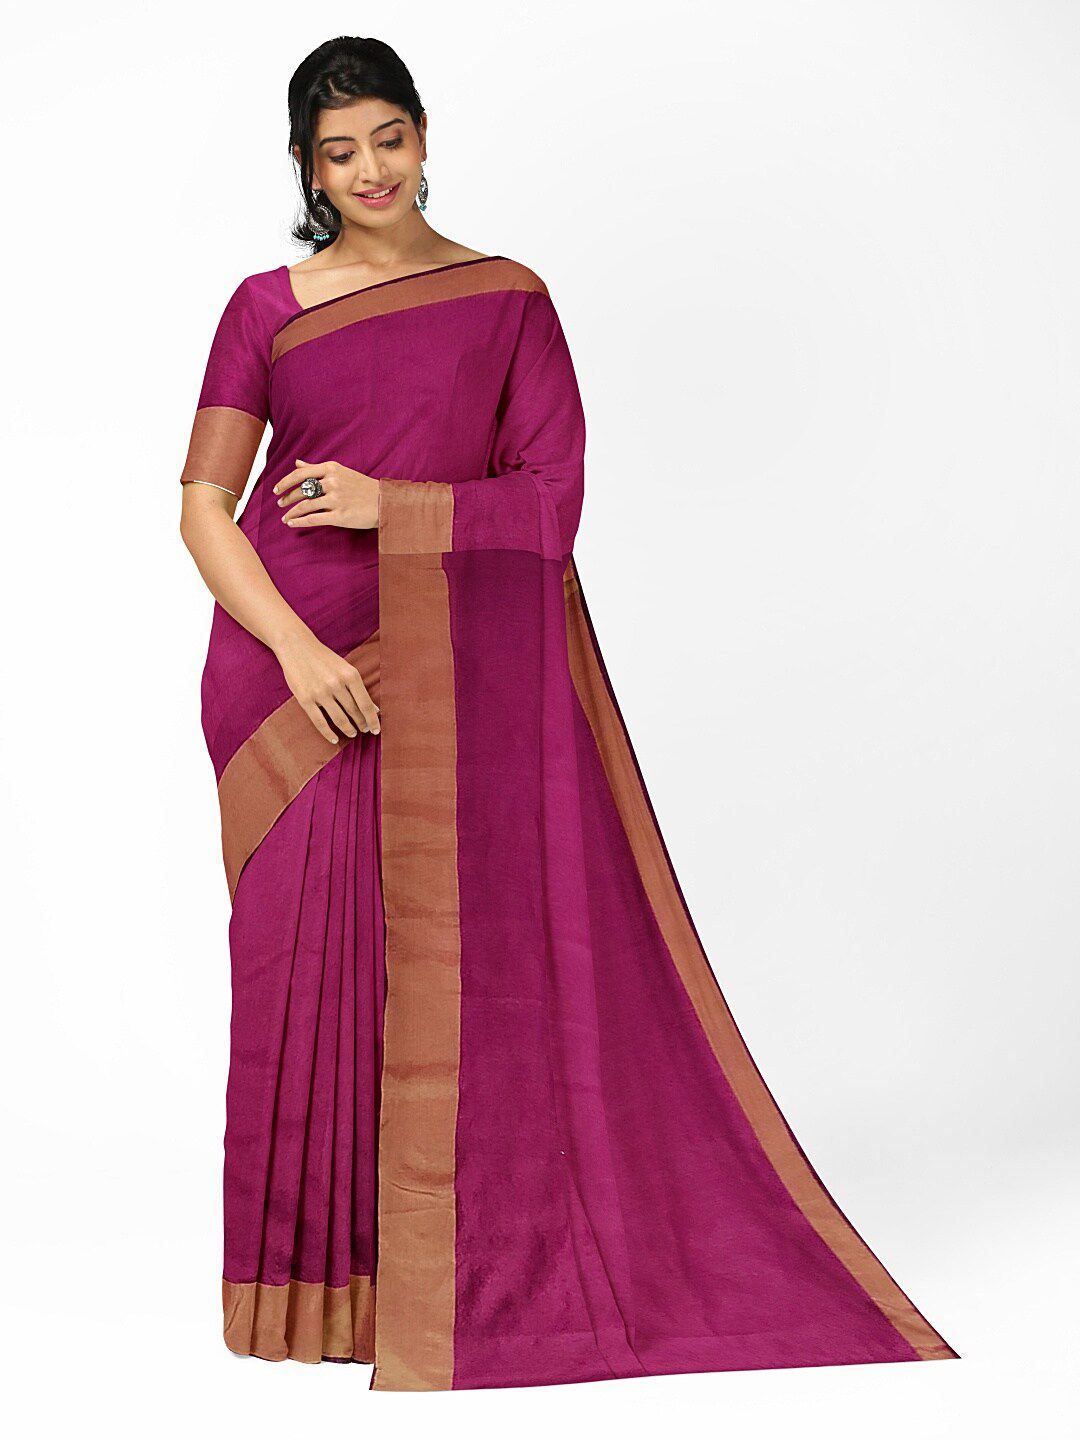 KALINI Pink & Gold-Toned Silk Cotton Saree With Un-Stitched Blouse Price in India